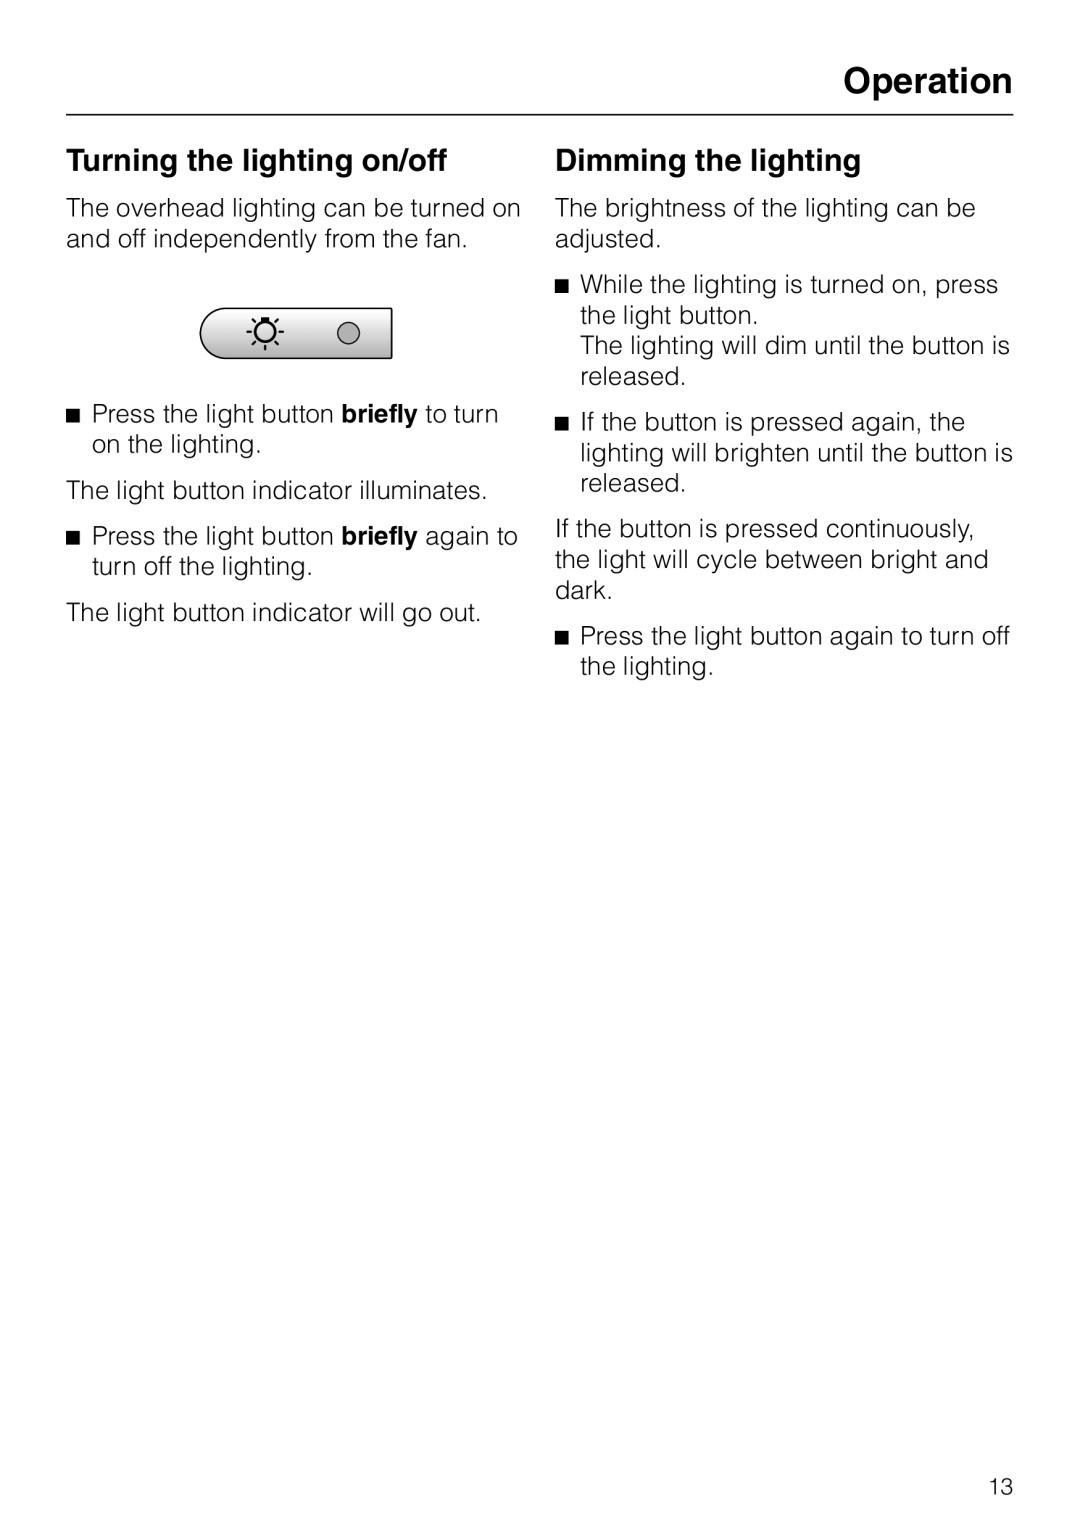 Miele DA403 installation instructions Turning the lighting on/off, Dimming the lighting, Operation 